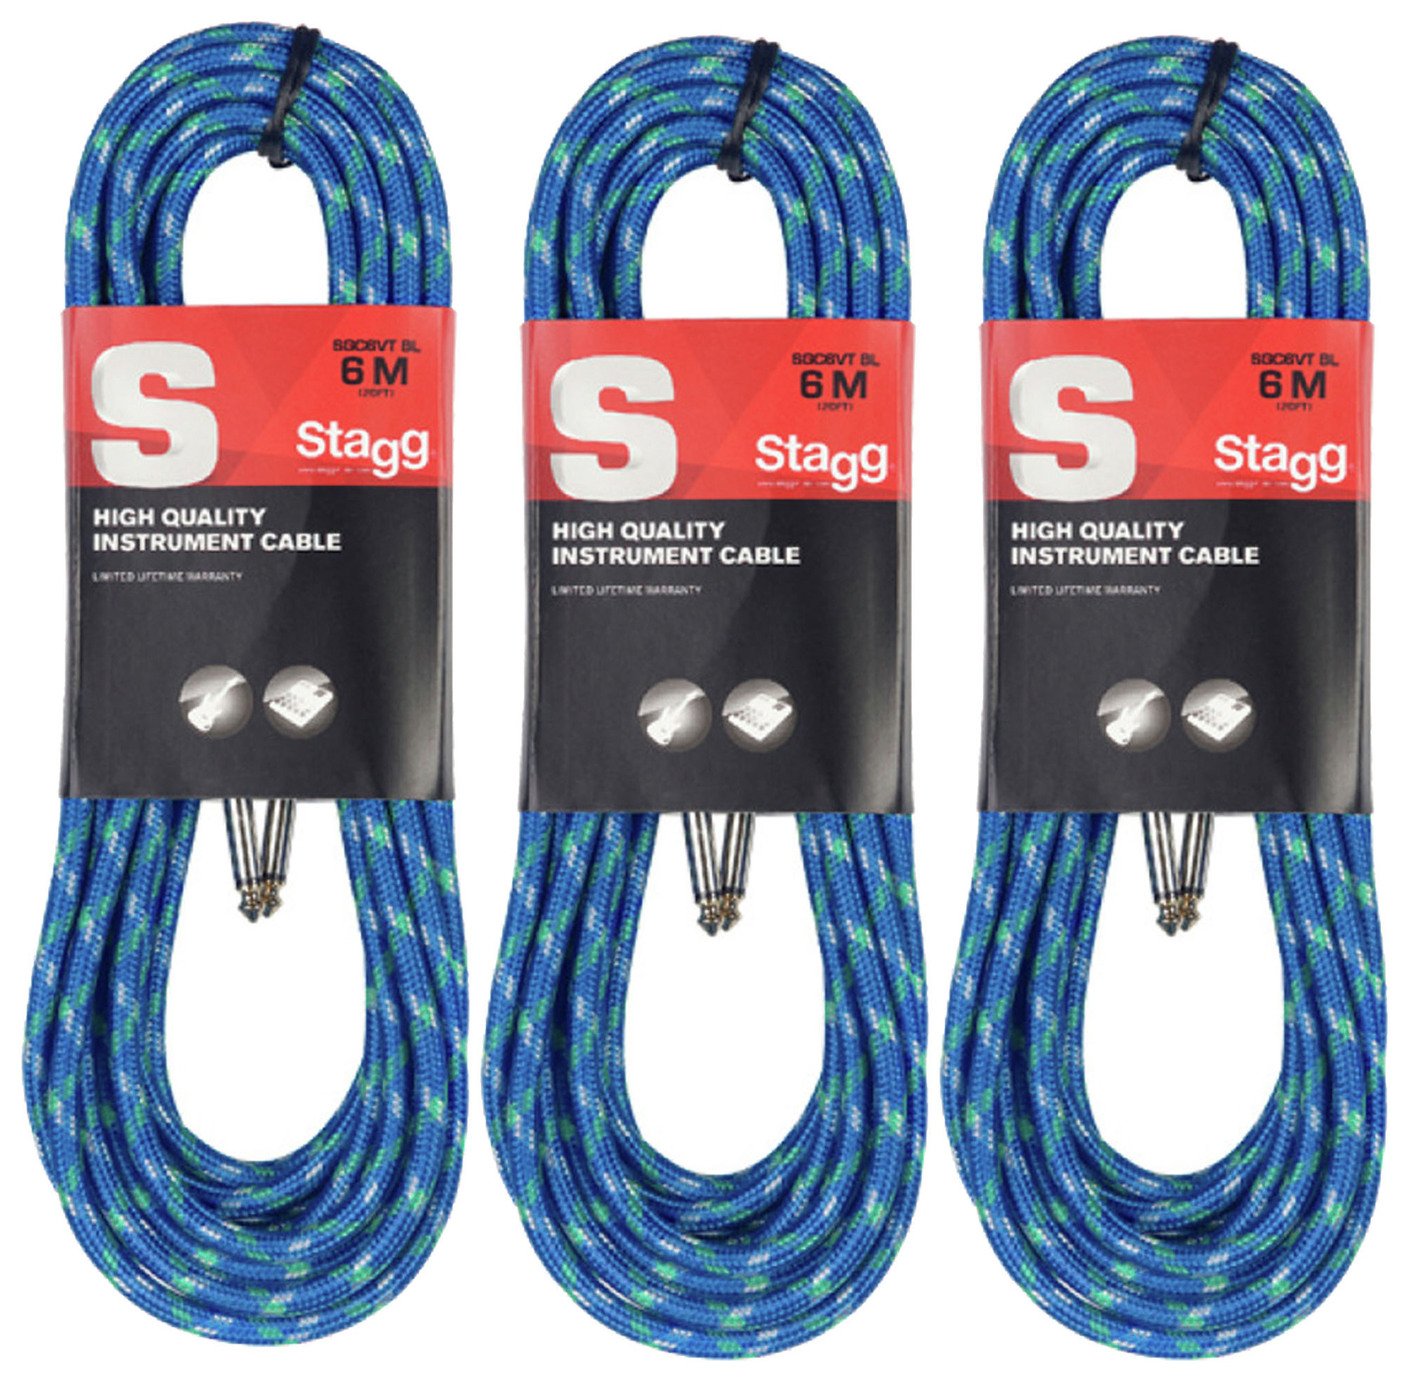 Stagg Tweed Guitar Cable - Set of 3